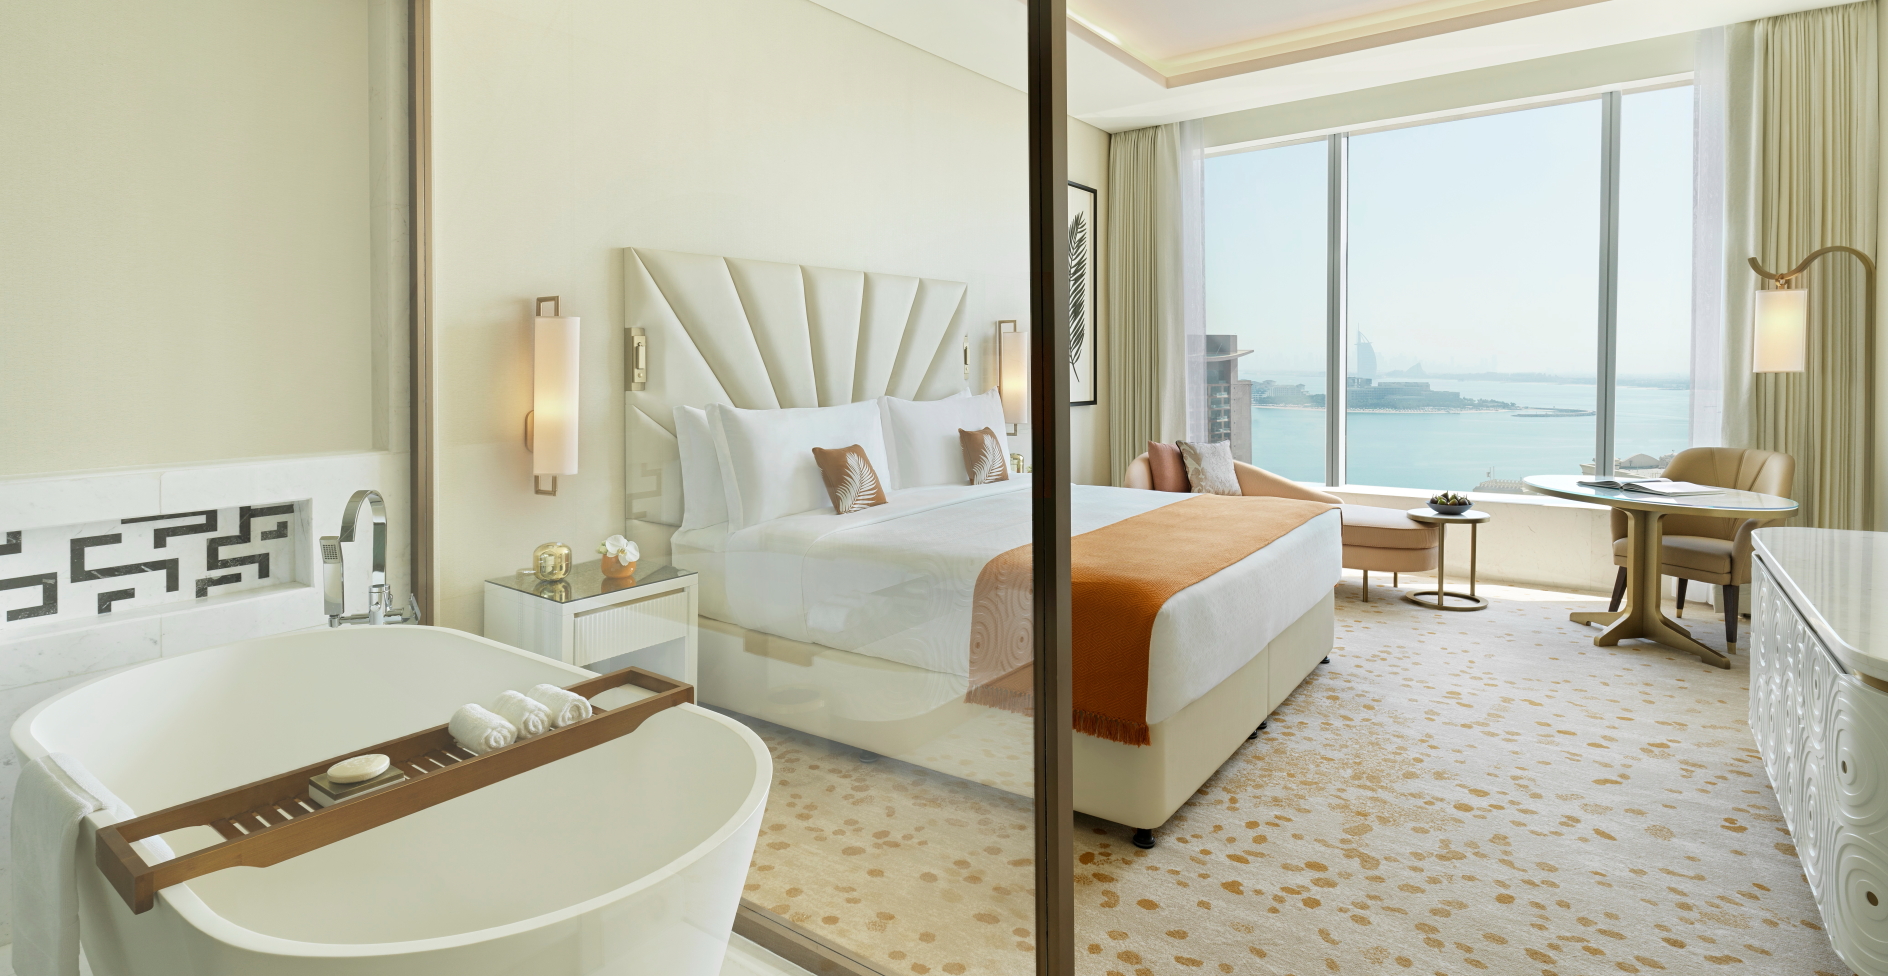 Deluxe Room at The St. Regis Dubai, The Pal. Click to enlarge.